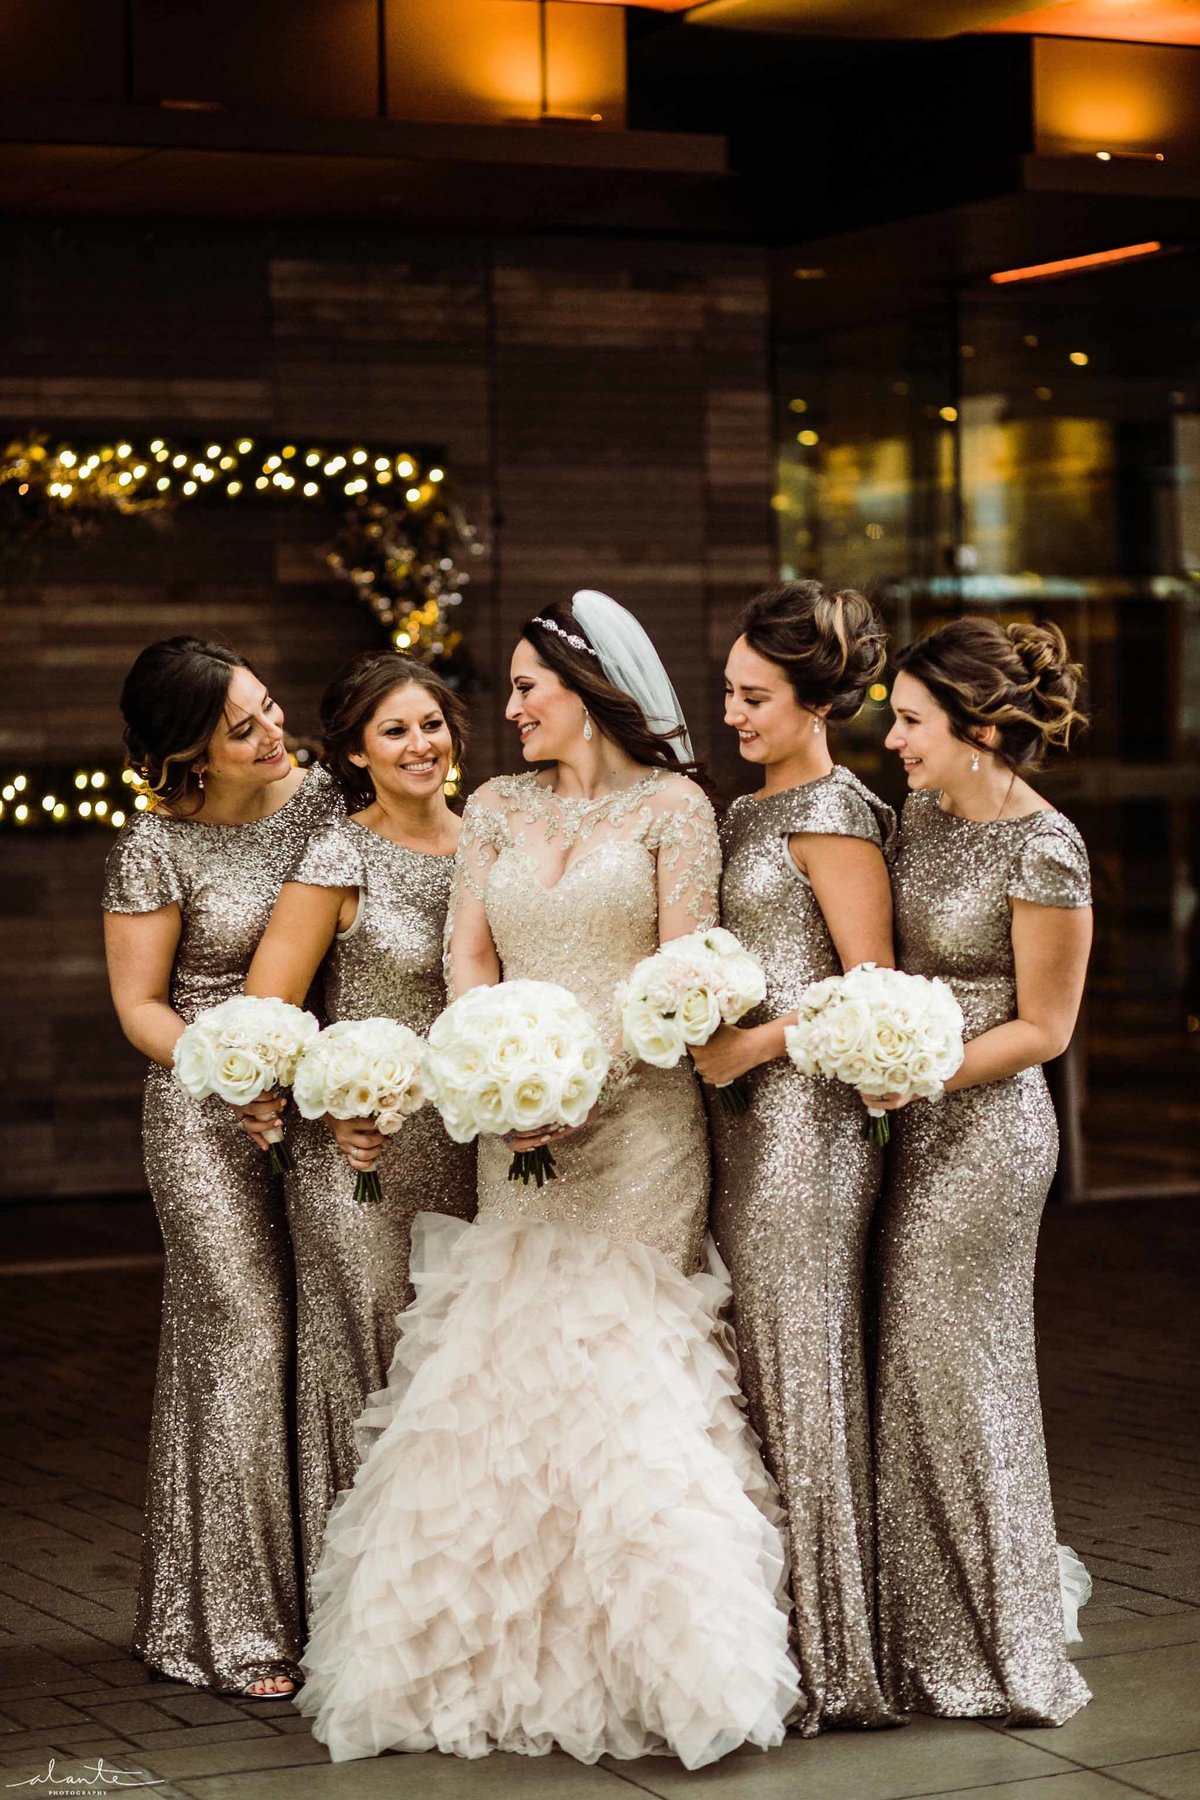 Glamorous bride and her bridesmaids dressed in champagne sequin dresses.